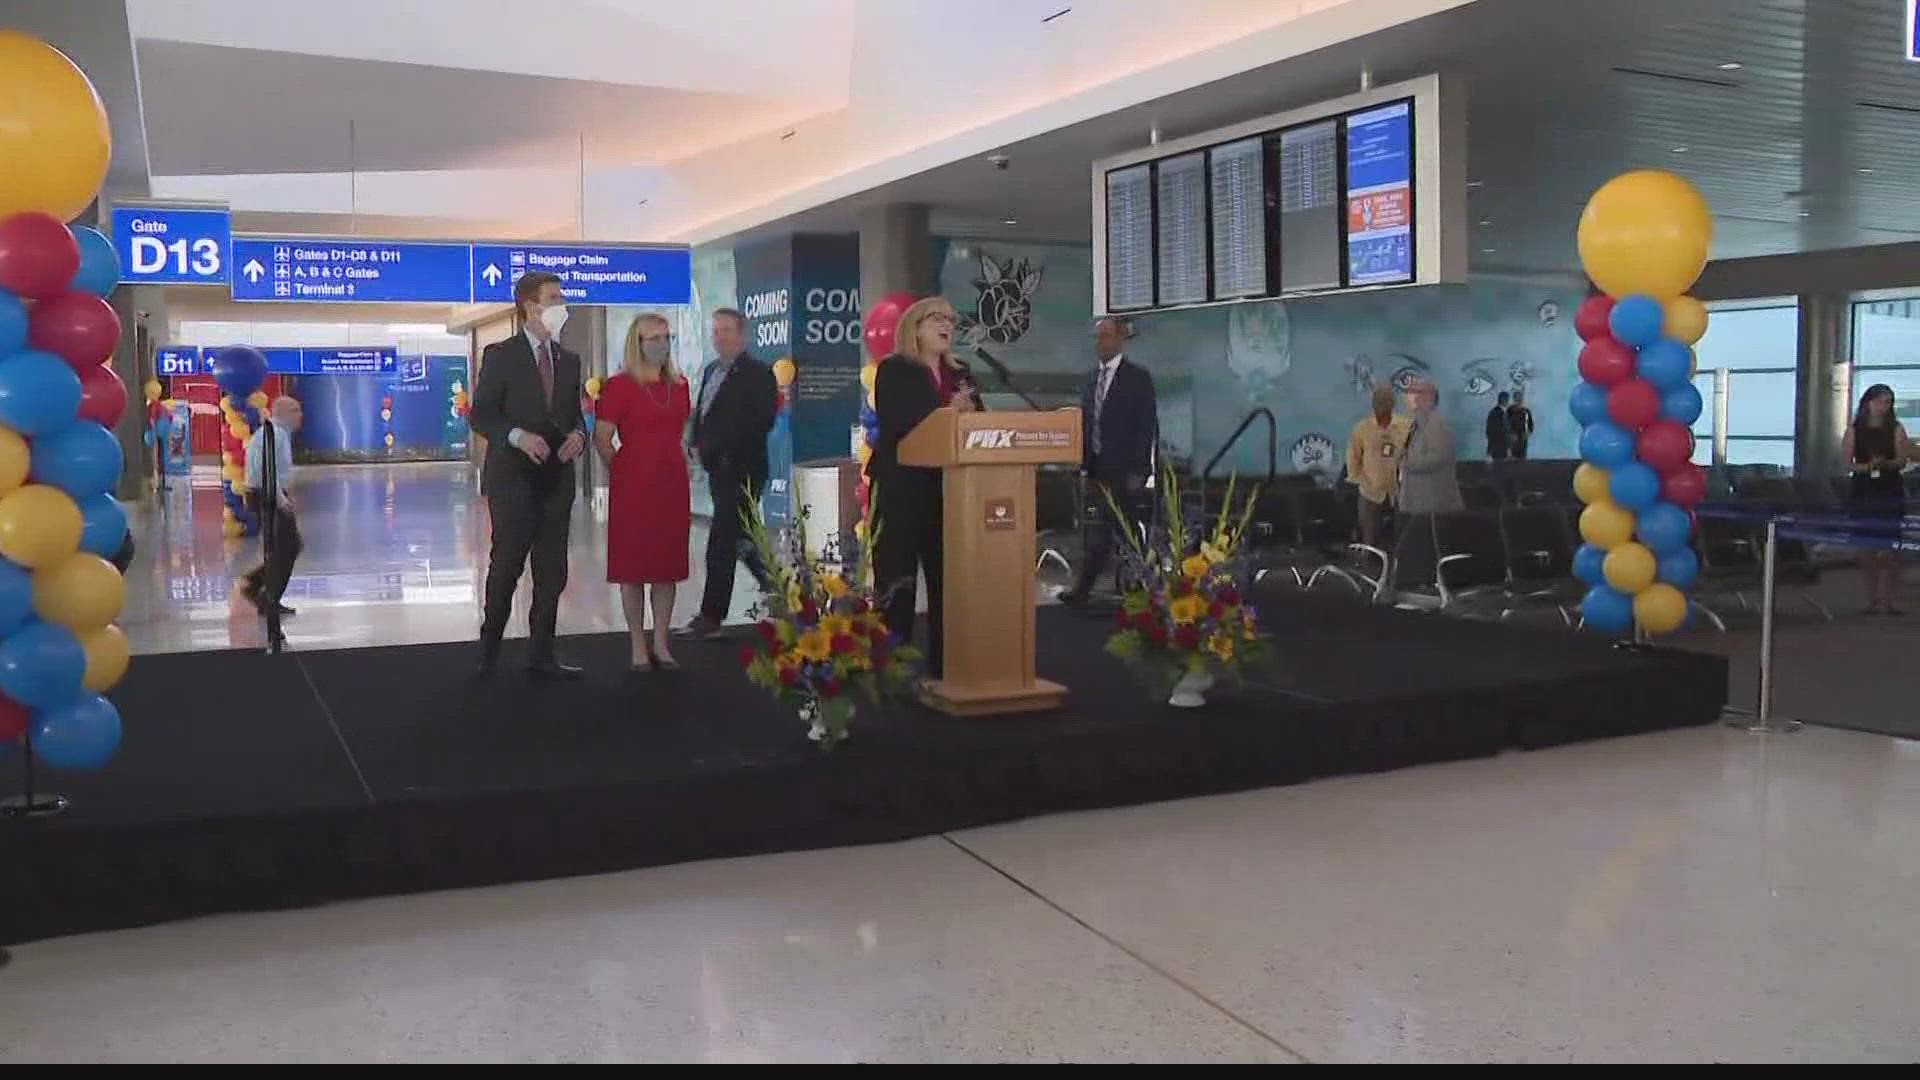 Phoenix Sky Harbor International Airport is opening a new concourse in Terminal 4. Trisha Hendricks has the details.